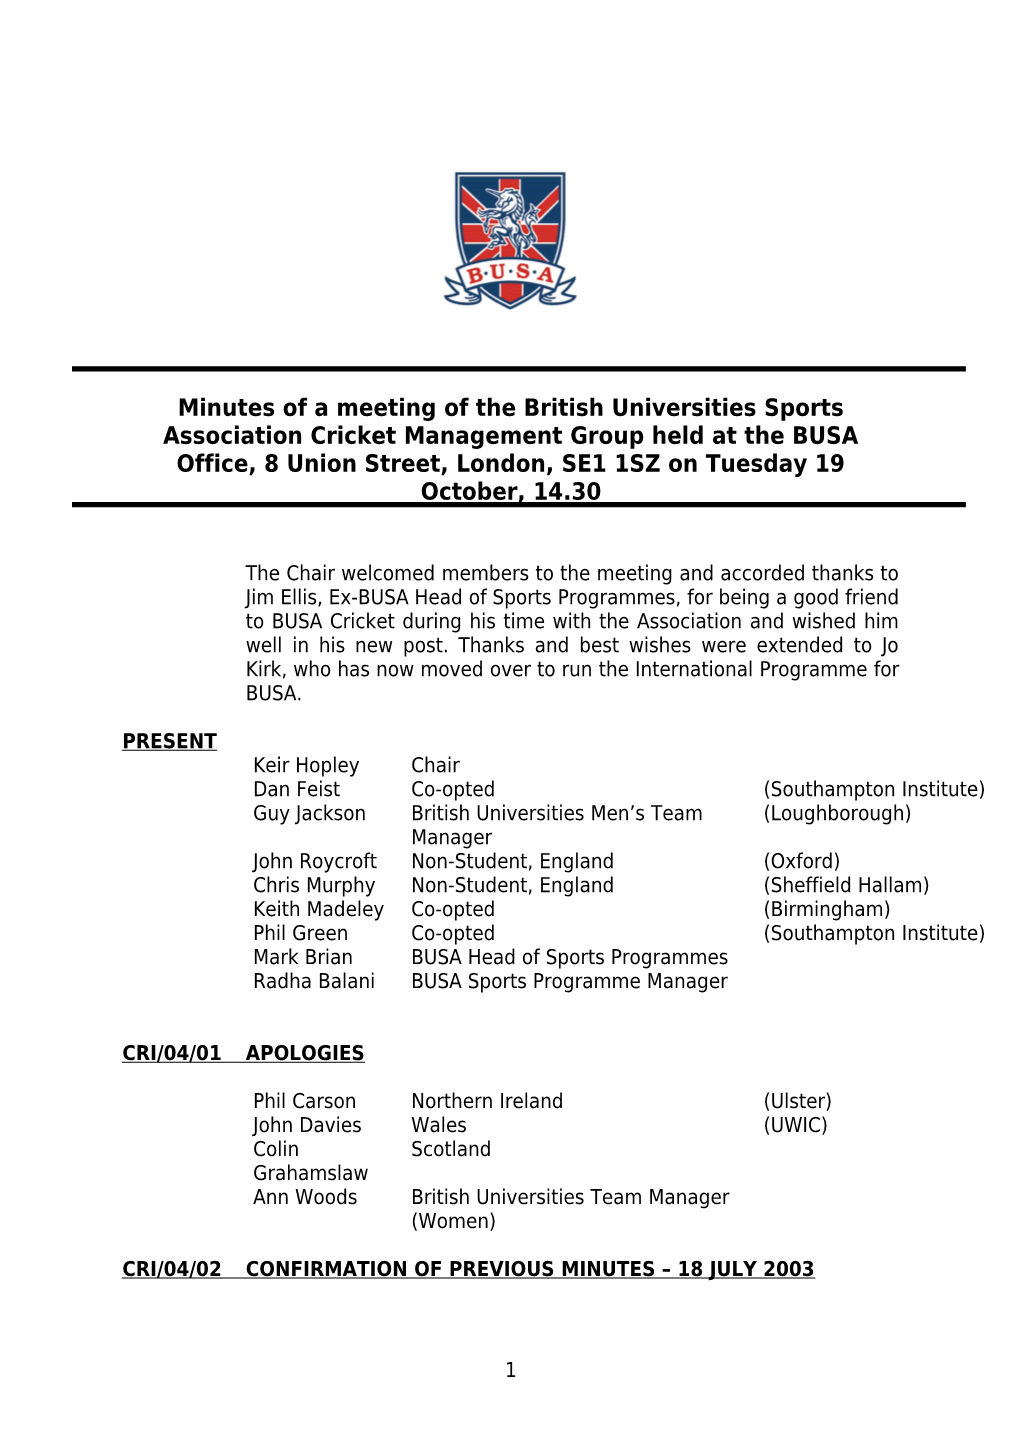 Minutes of a Meeting of the British Universities Sports Association Cricket Management